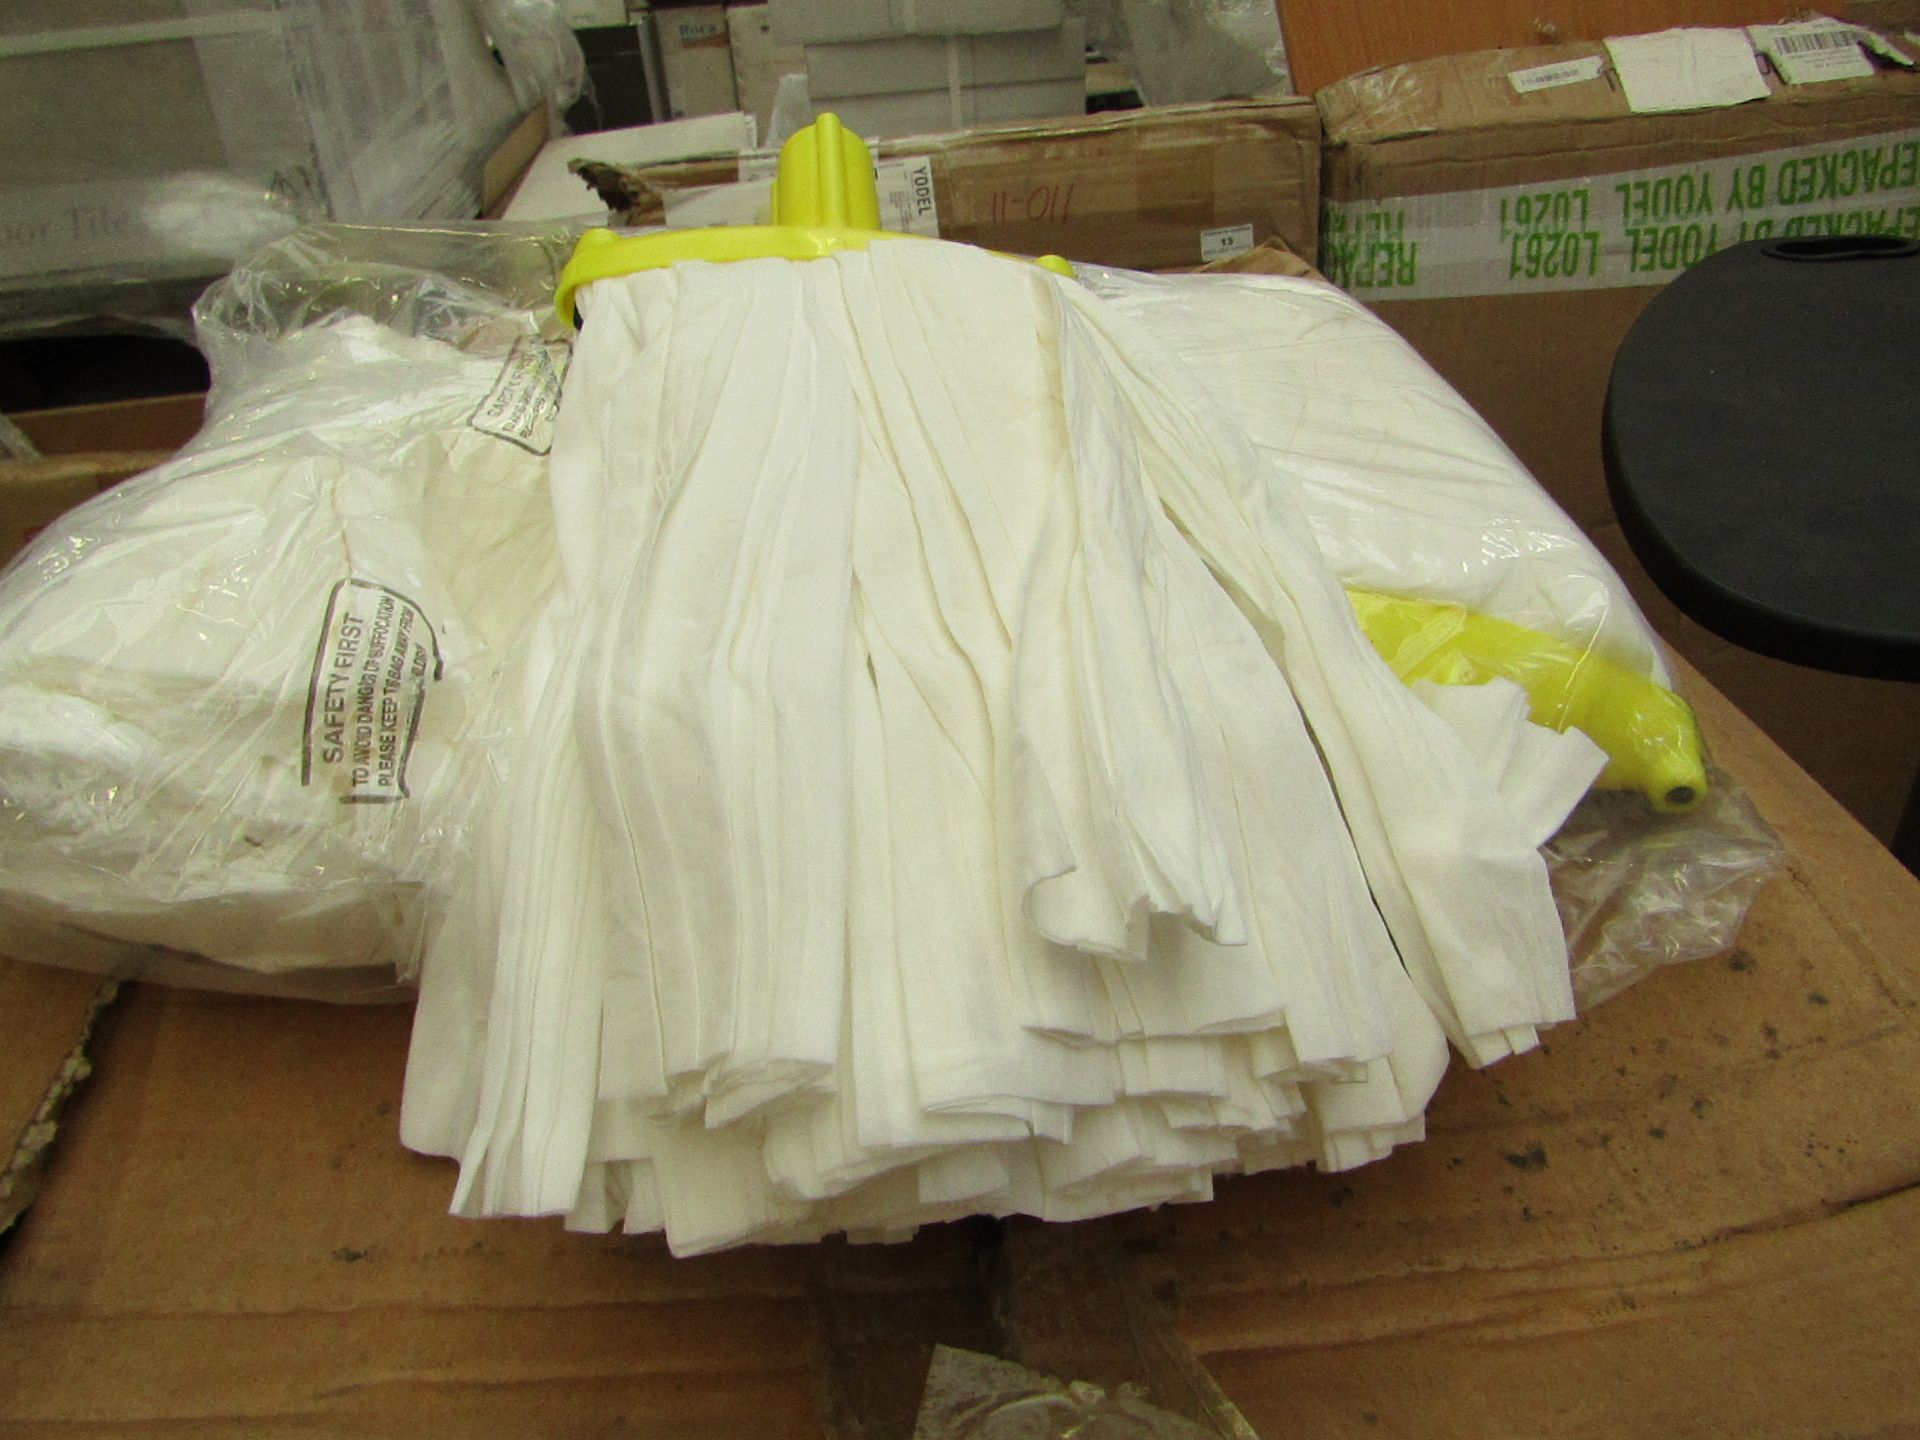 Box of 50 Universal Mop Heads. All New & Packaged.